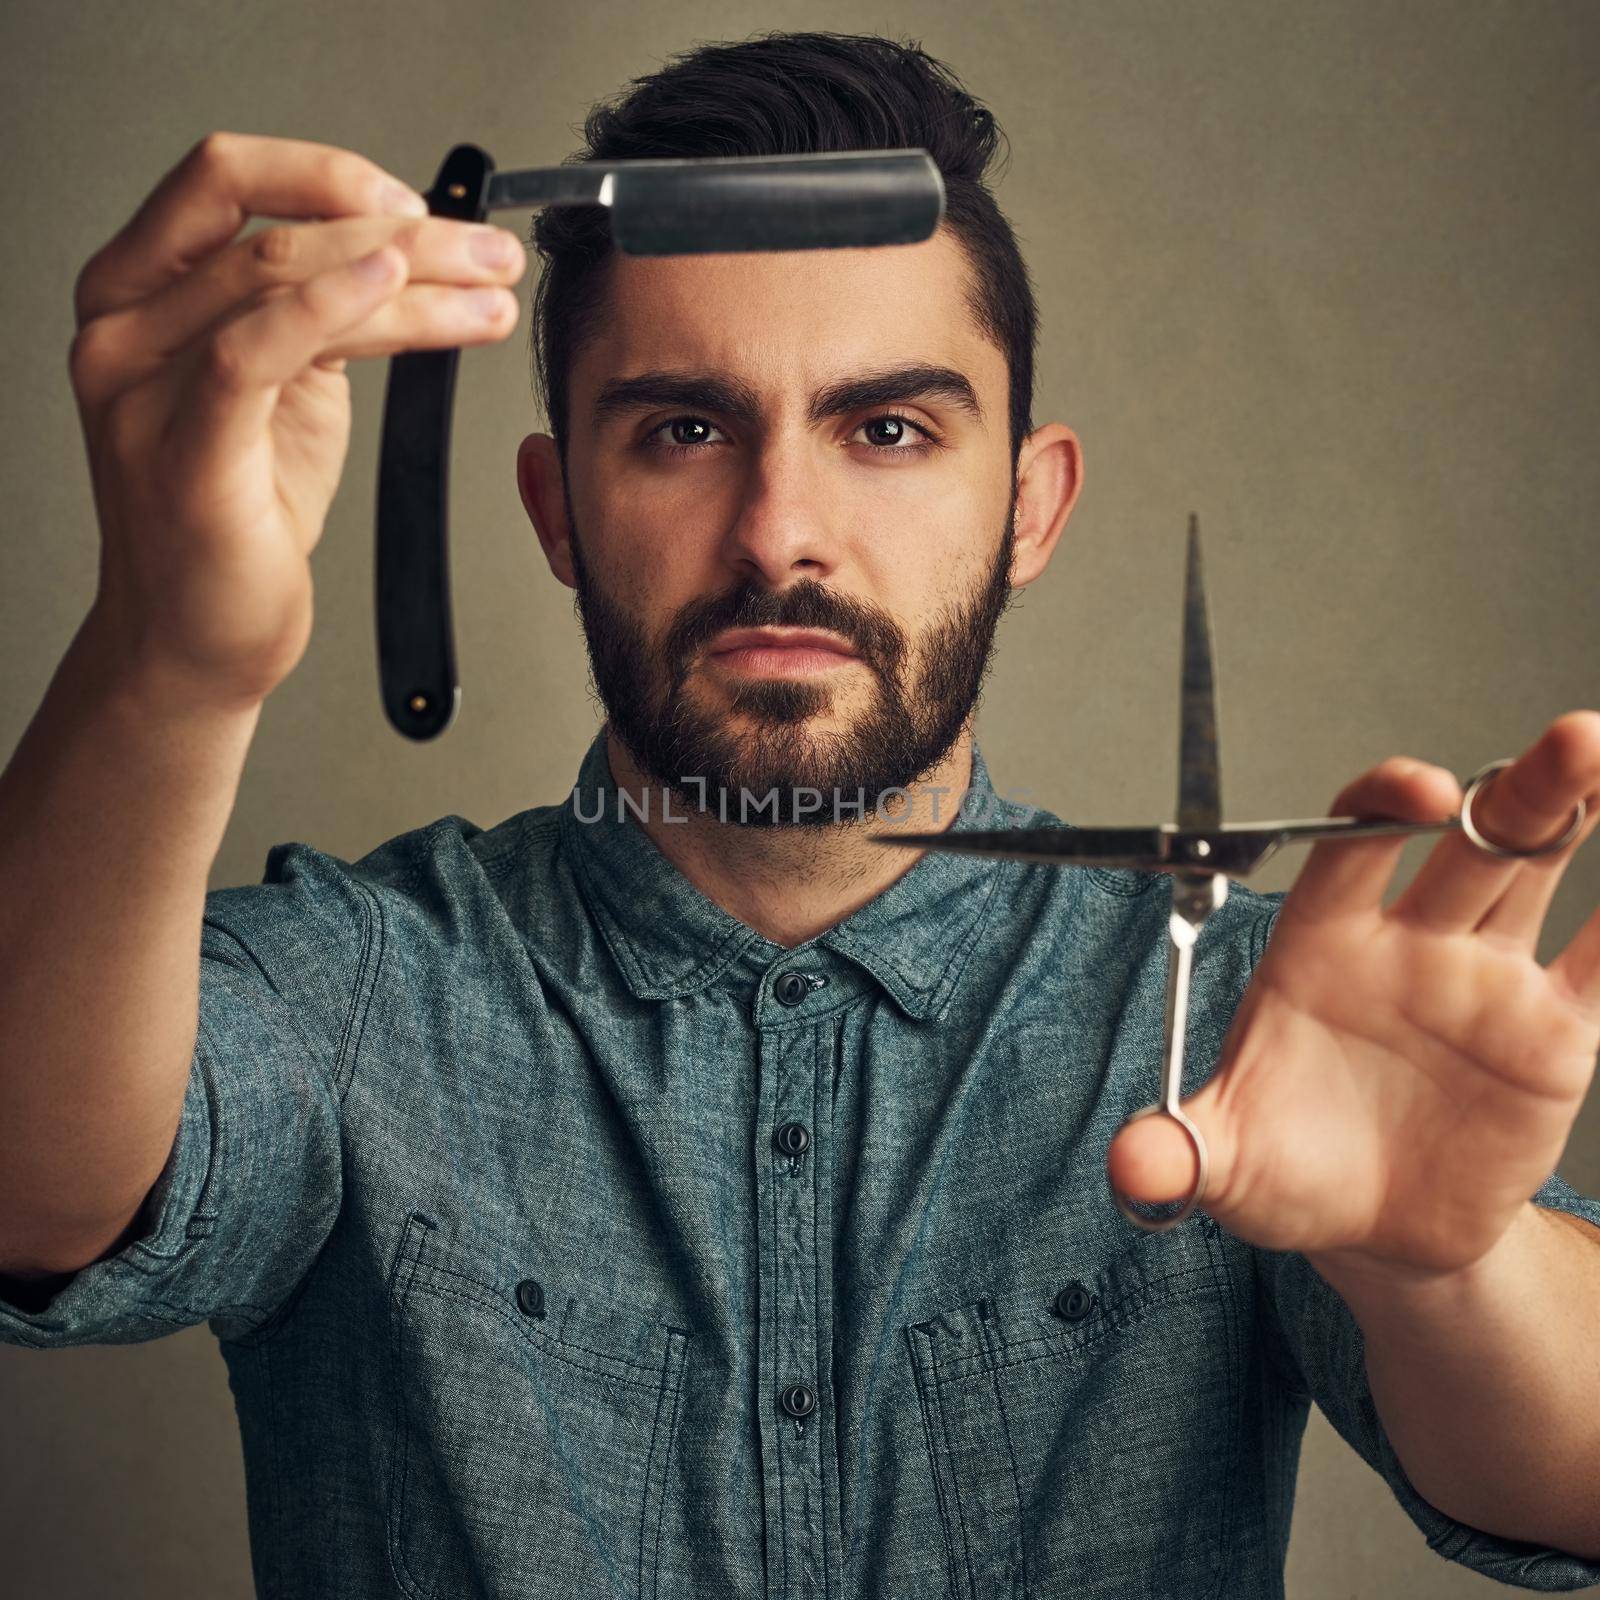 Studio shot of a handsome young man holding a straight razor and a scissor in his hands.